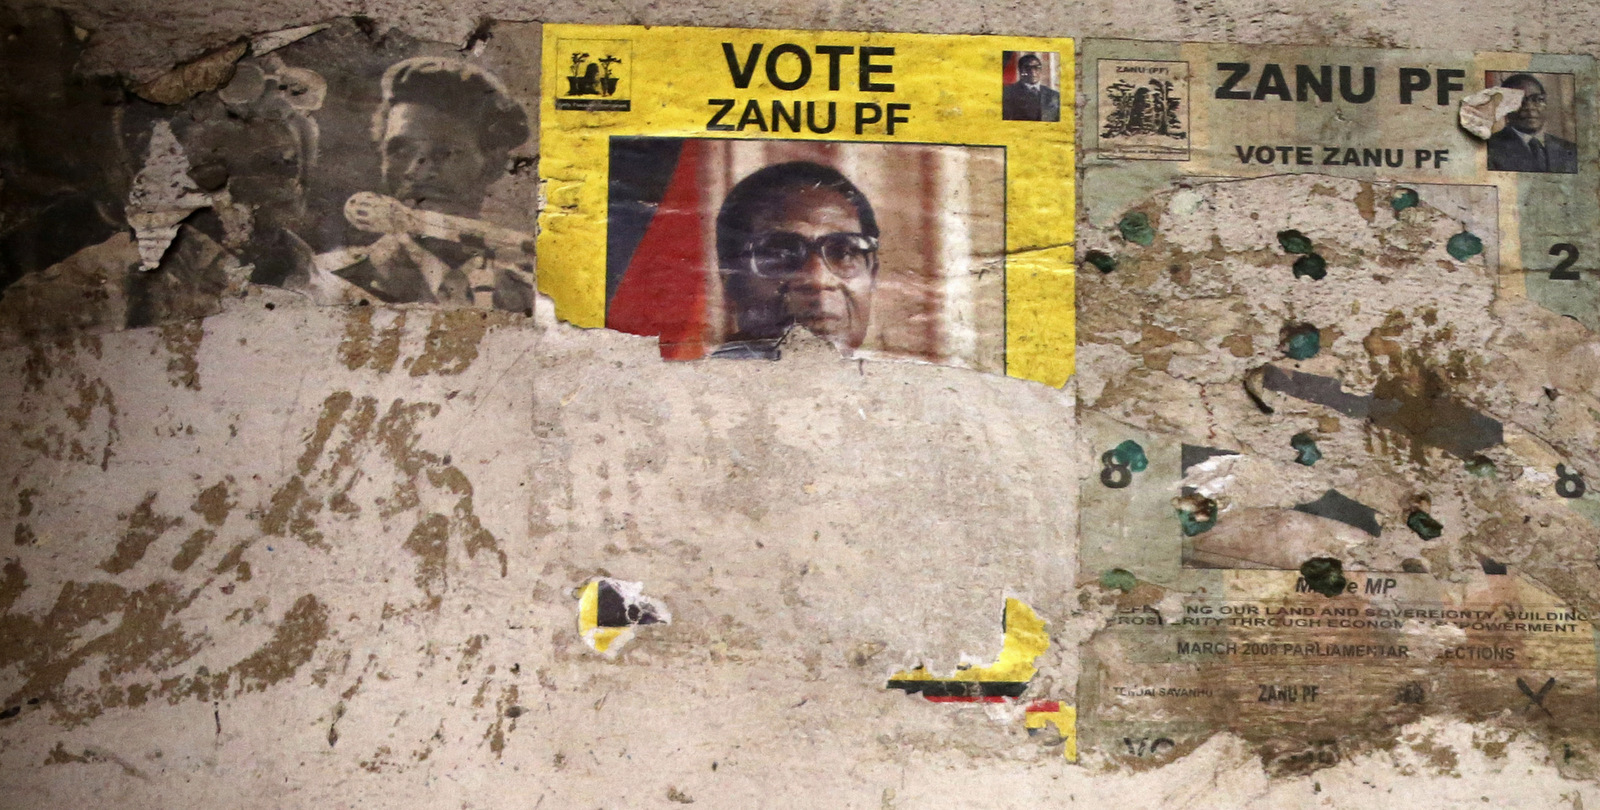 An election poster from the 2008 Zanu Pf election campaign on the wall of a dilapidated old building in the Mbara suburb of Harare, Friday Nov. 17, 2017. Zimbabwe's military says it is making "significant progress" in talks with President Robert Mugabe for his departure while it pursues and arrests some allies of the leader and his wife. (AP Photo)